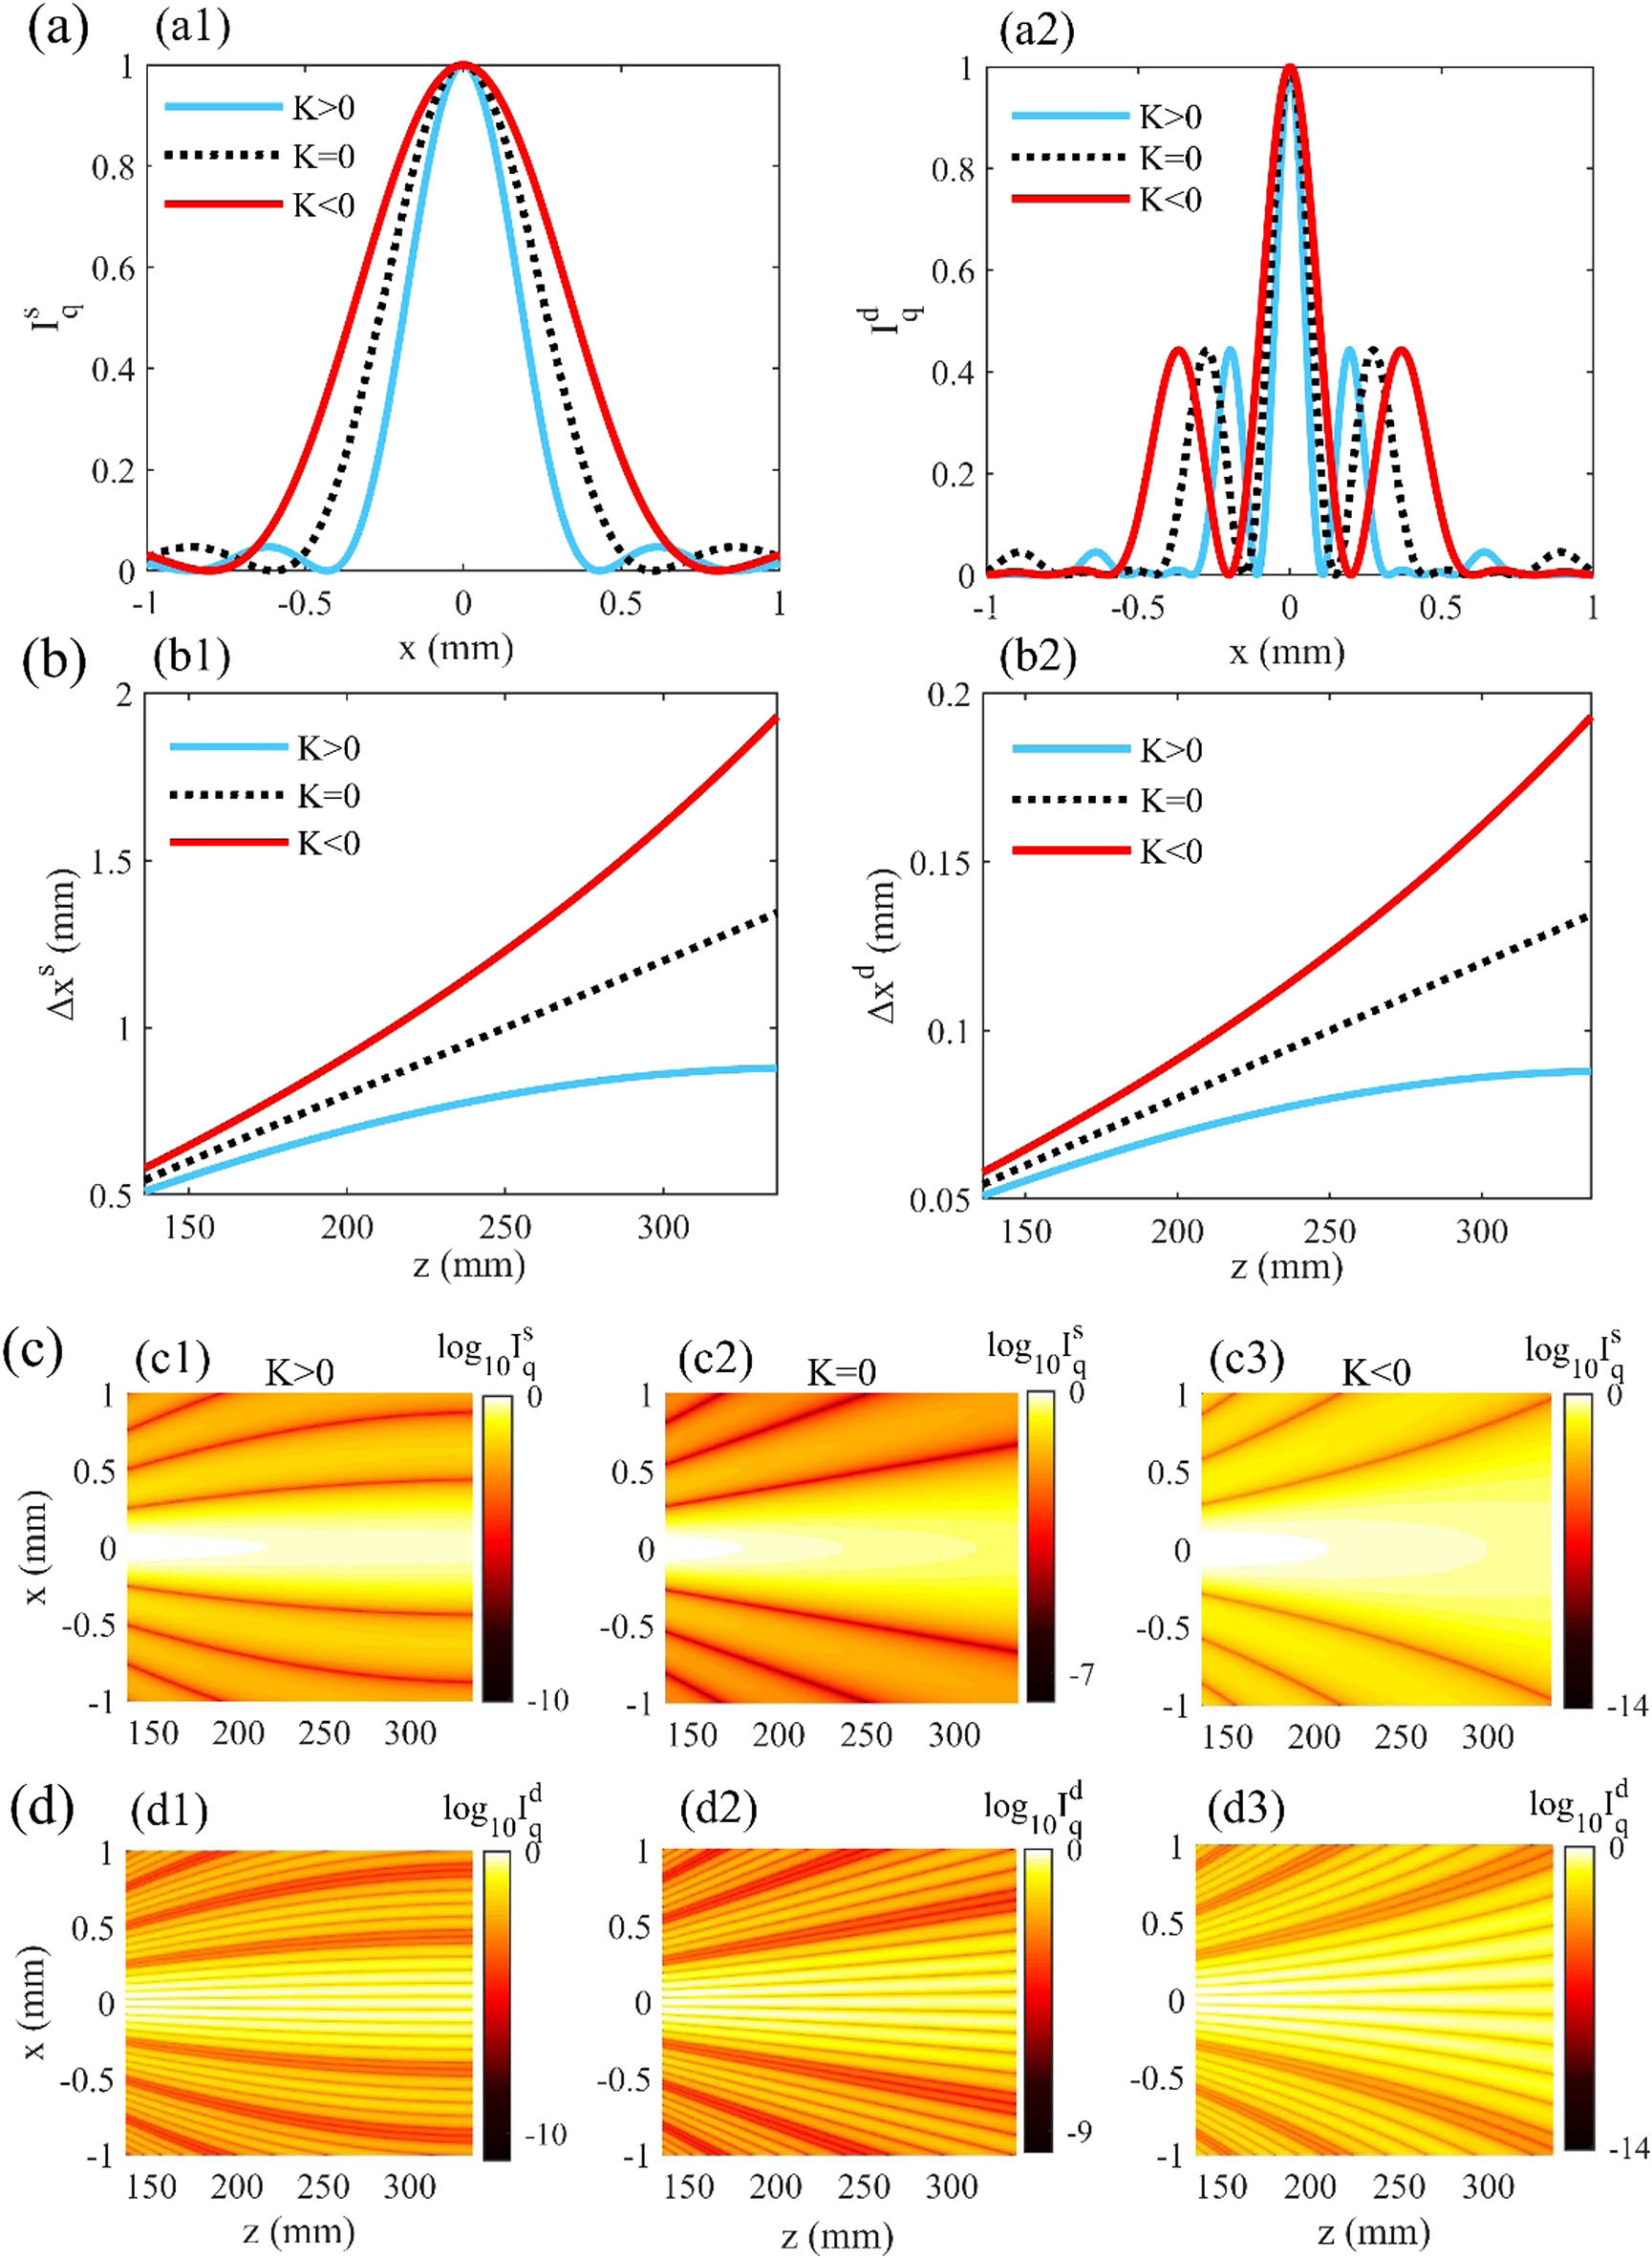 Diffraction and interference on curved space. (a) Intensity distributions of Fraunhofer (a1) single-slit diffraction and (a2) double-slit interference of light at z=300 mm on SORs with different Gaussian curvature. (b) Variations of the central fringe widths Δxs and Δxd for (b1) single-slit diffraction and (b2) double-slit interference with the propagation distance in different SORs. (c), (d) Evolutions of light fields of Fraunhofer (c) single-slit diffraction and (d) double-slit interference in different spaces: (c1), (d1) K>0, (c2), (d2) K=0, and (c3), (d3) K<0. Here the parameters for SORs with R=220 mm are taken as K=20.66 m−2 for K>0, and K=−20.66 m−2 for K<0. Other parameters are λ=400 nm, r0=100 mm, a=0.1 mm, d=0.2 mm in (a2) and d=0.8 mm in (d1)–(d3) for better visualization.